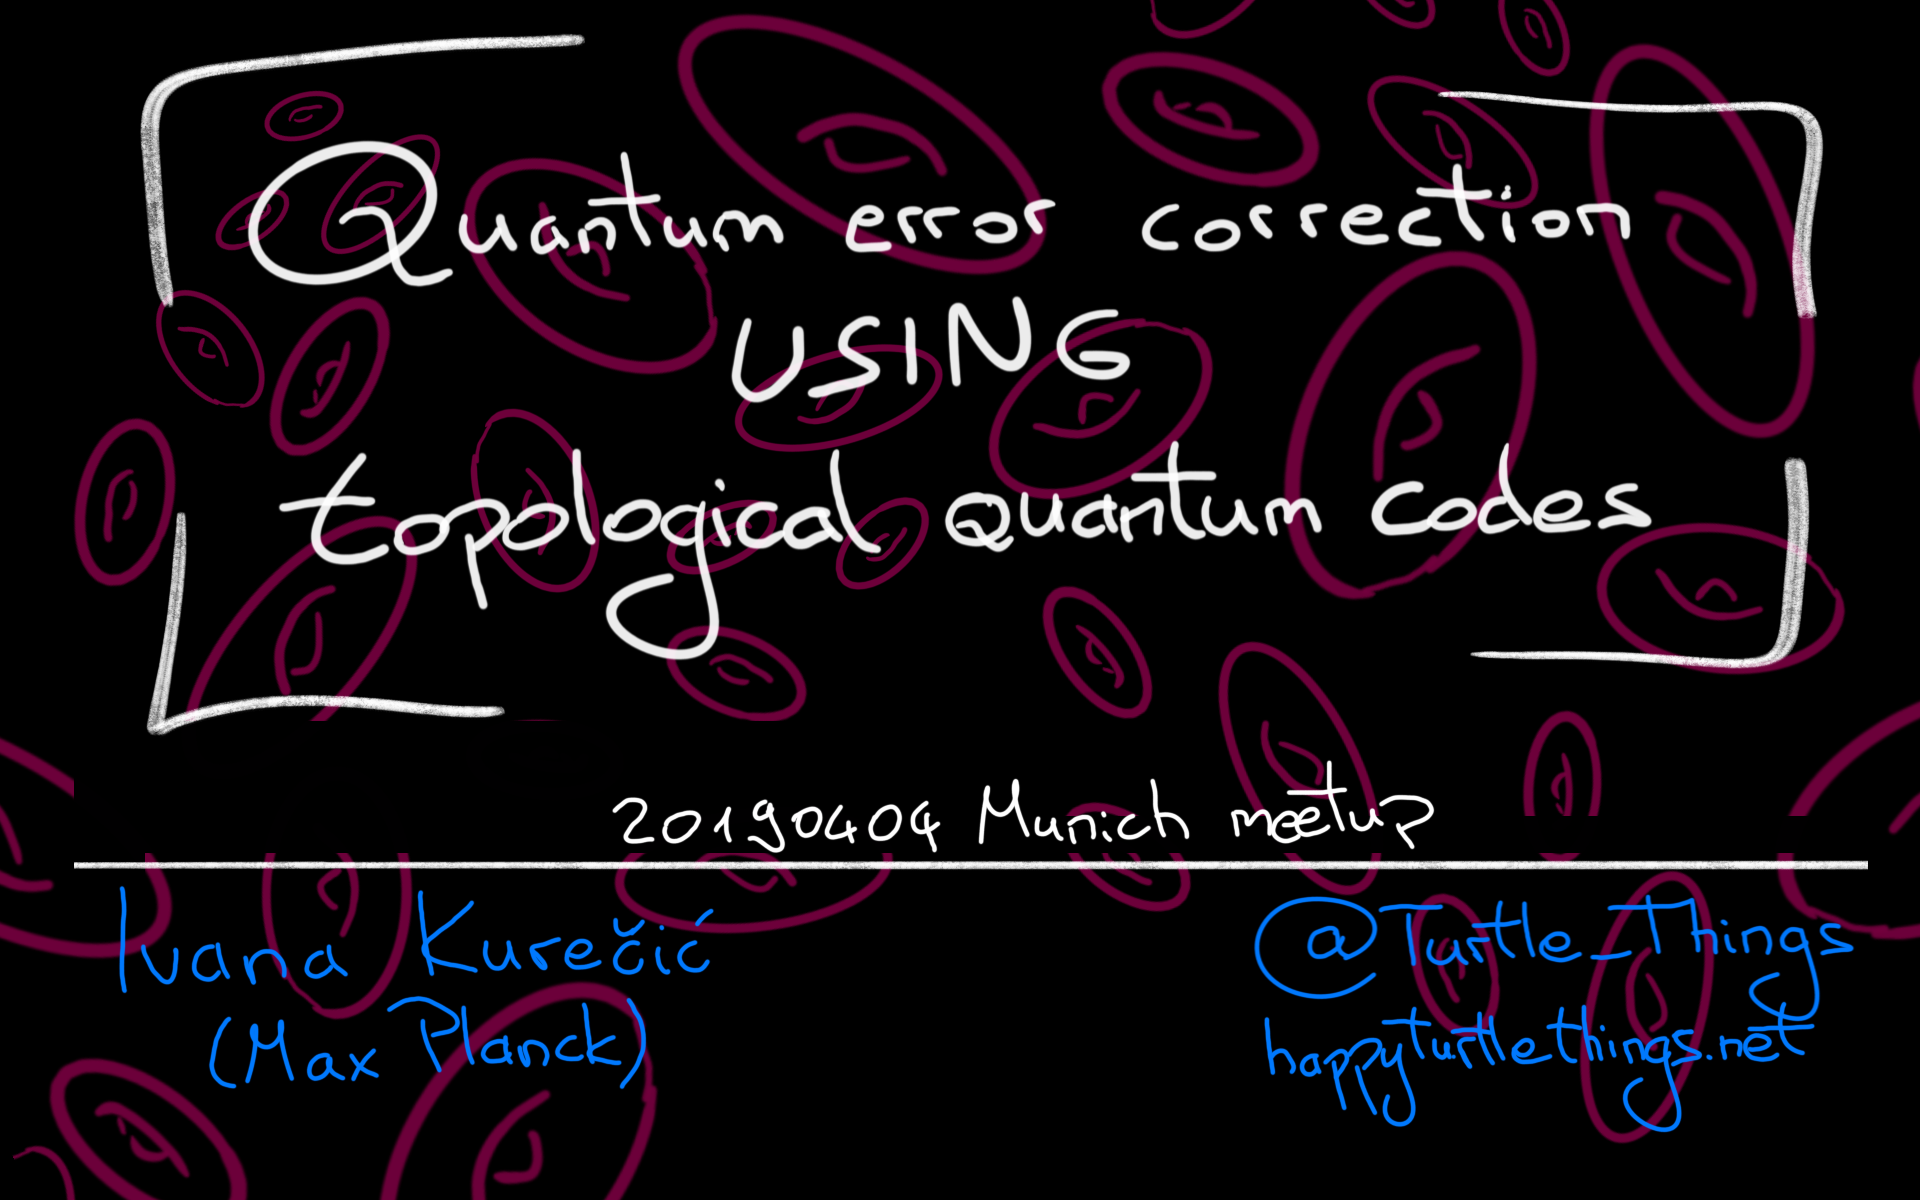 Slides from the Quantum Technologies Meetup 2019/04/04